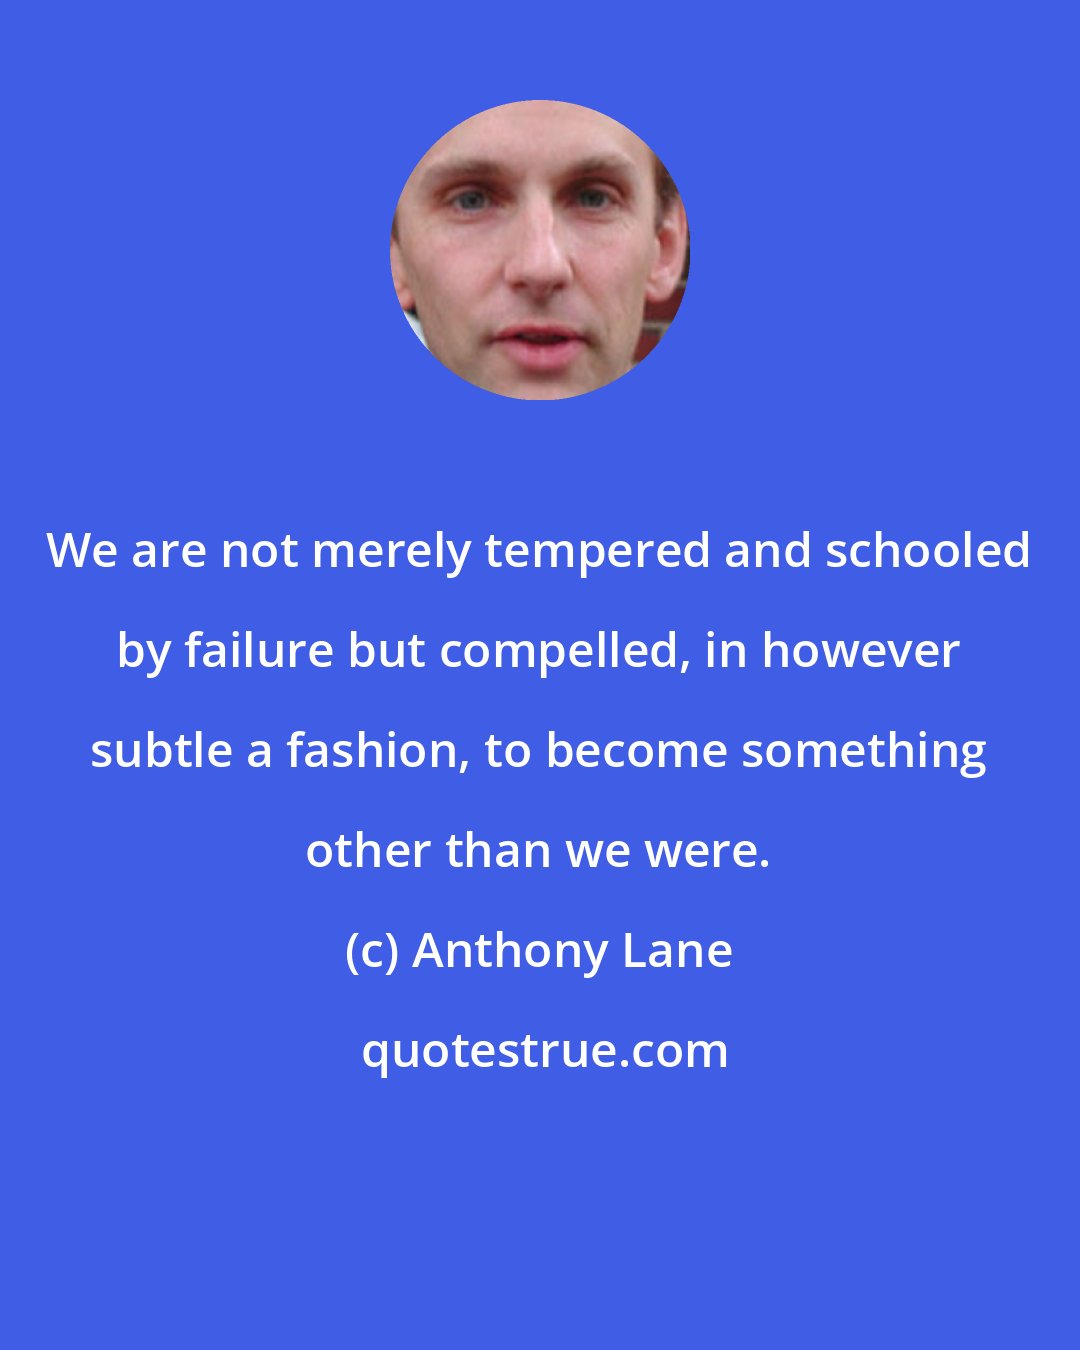 Anthony Lane: We are not merely tempered and schooled by failure but compelled, in however subtle a fashion, to become something other than we were.